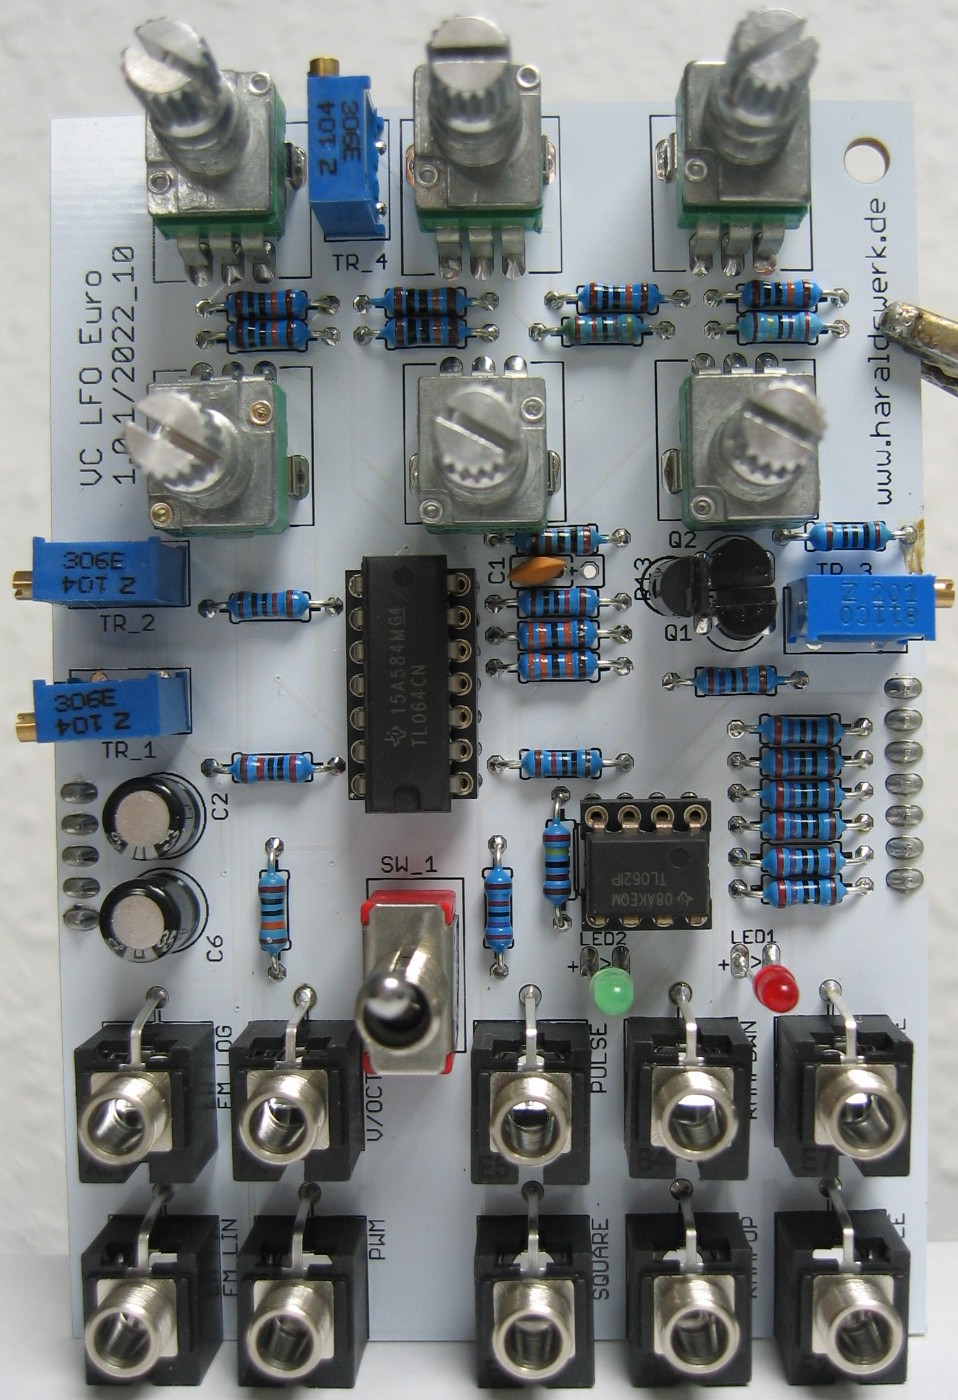 Voltage controlled LFO Euro populated control PCB